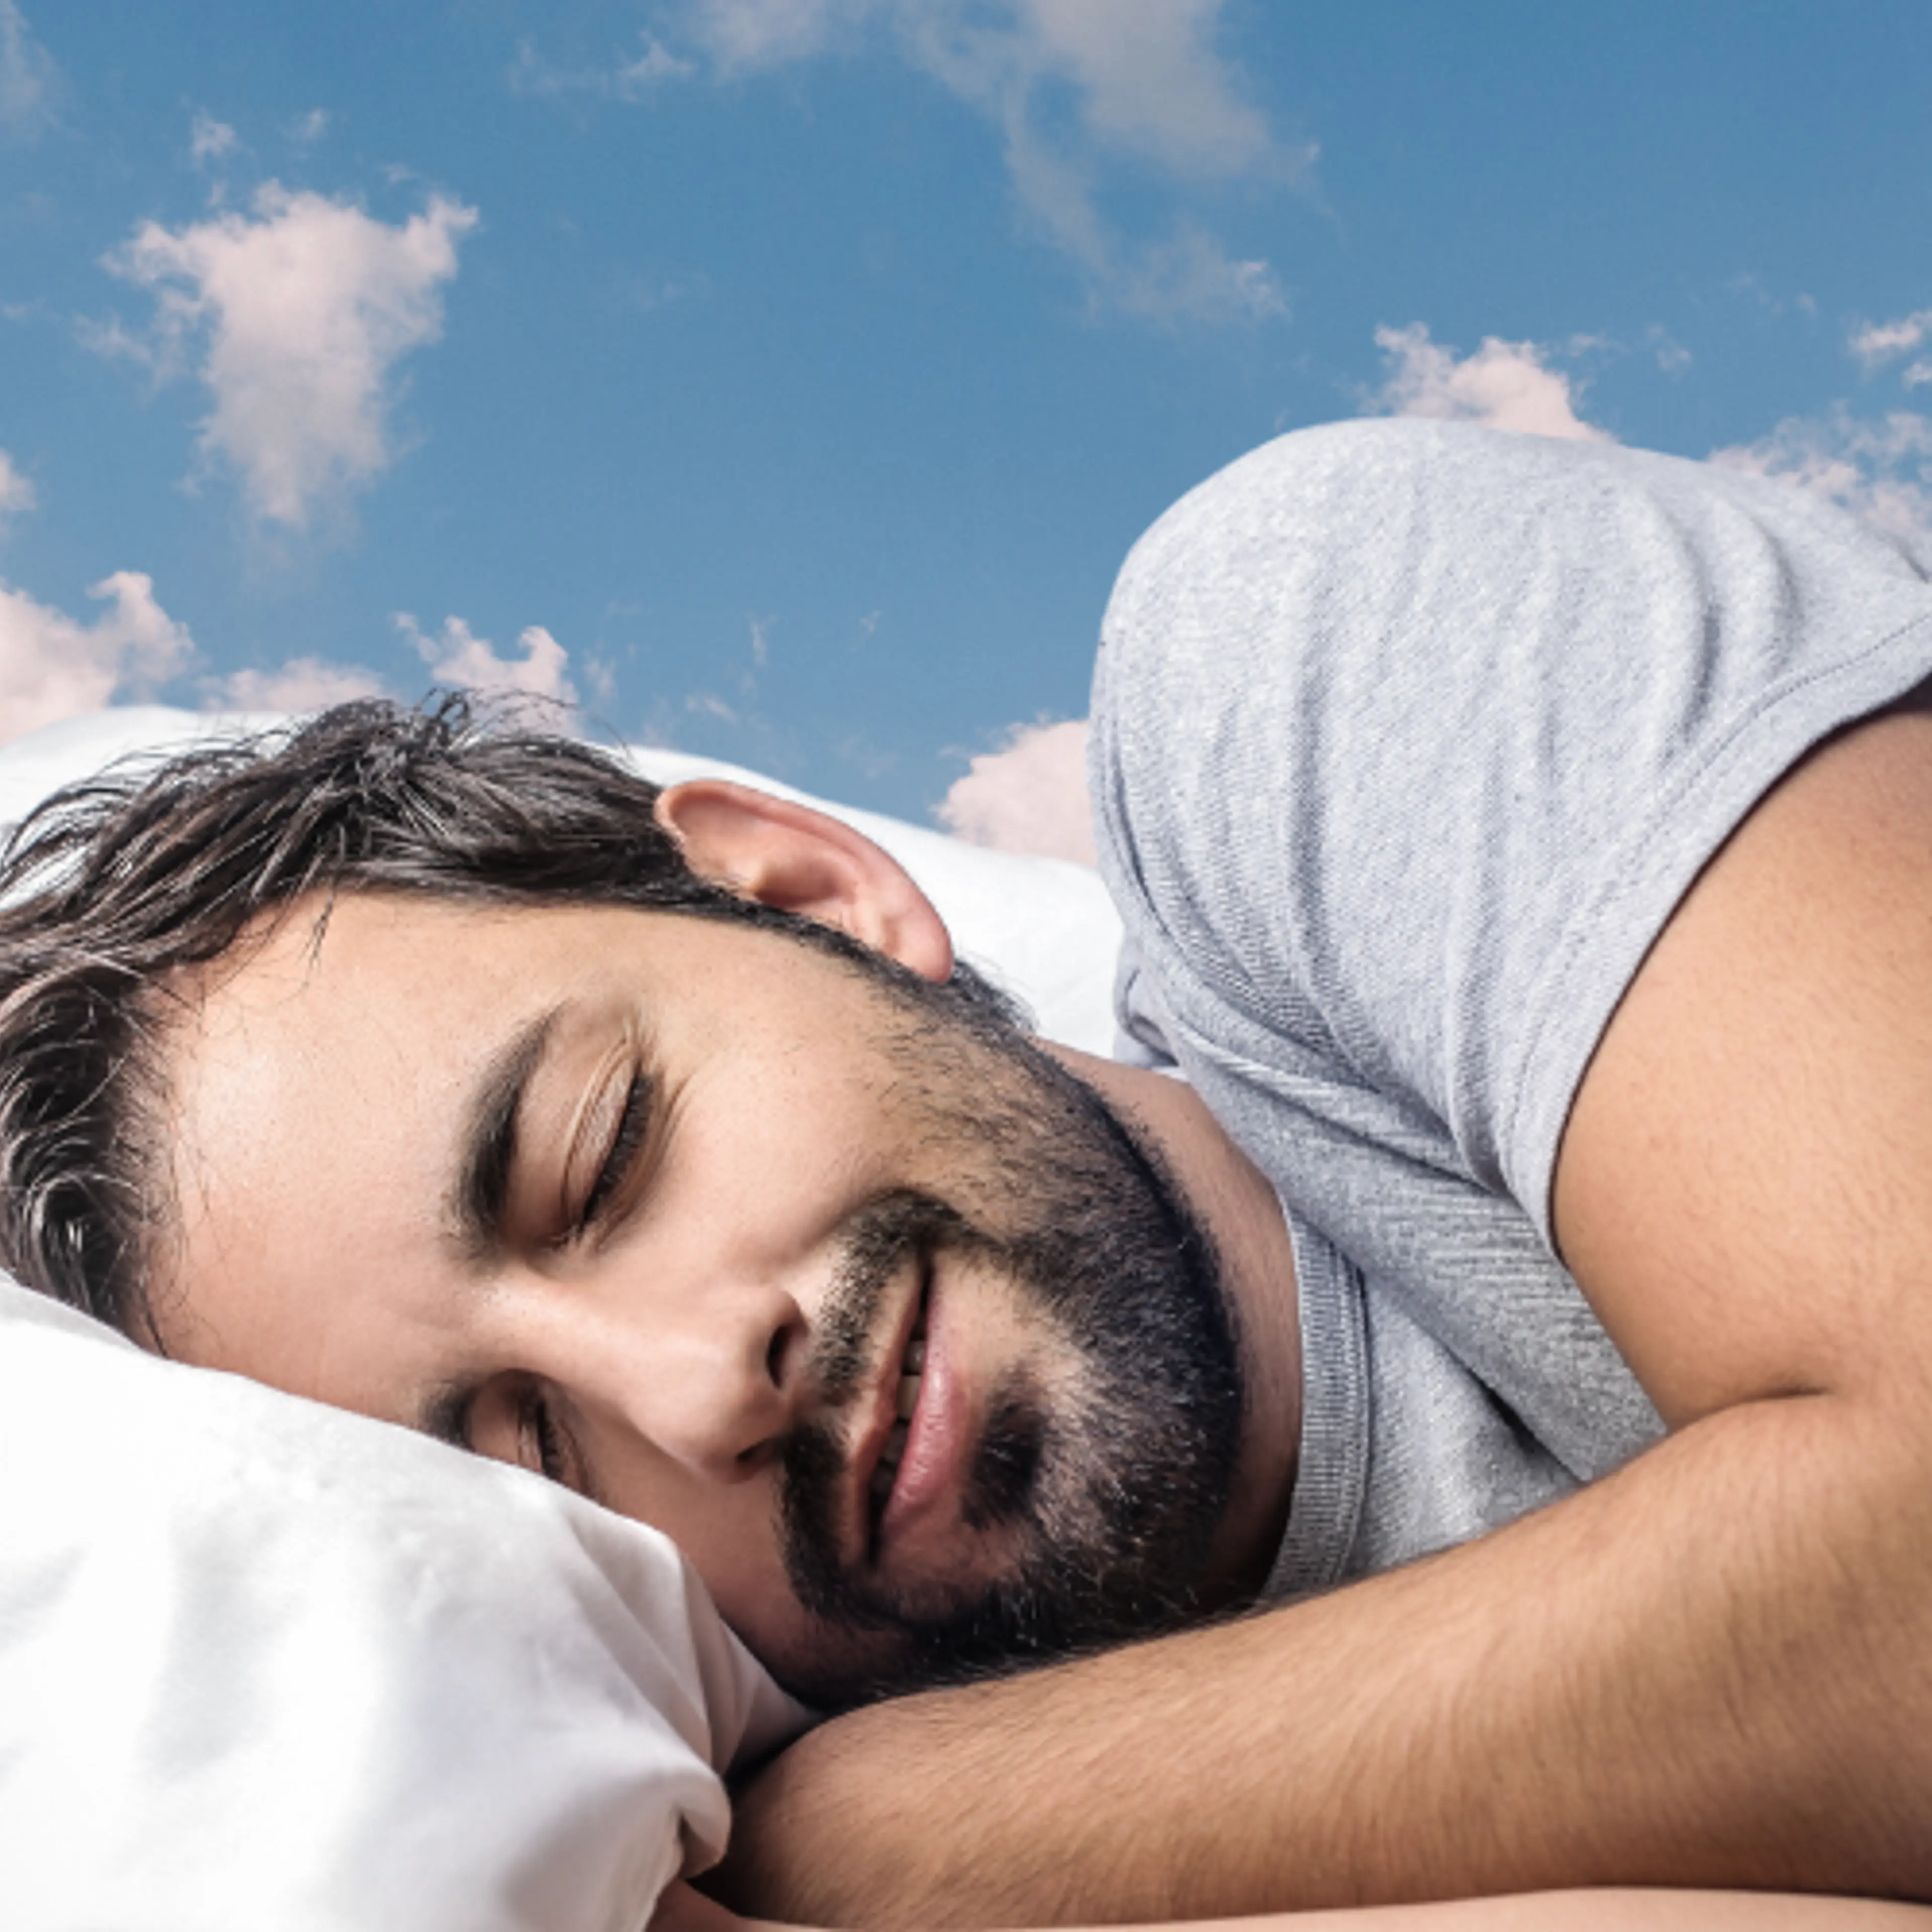 Can't Sleep? Try This Simple 4-7-8 Breathing Hack for Instant Better Rest